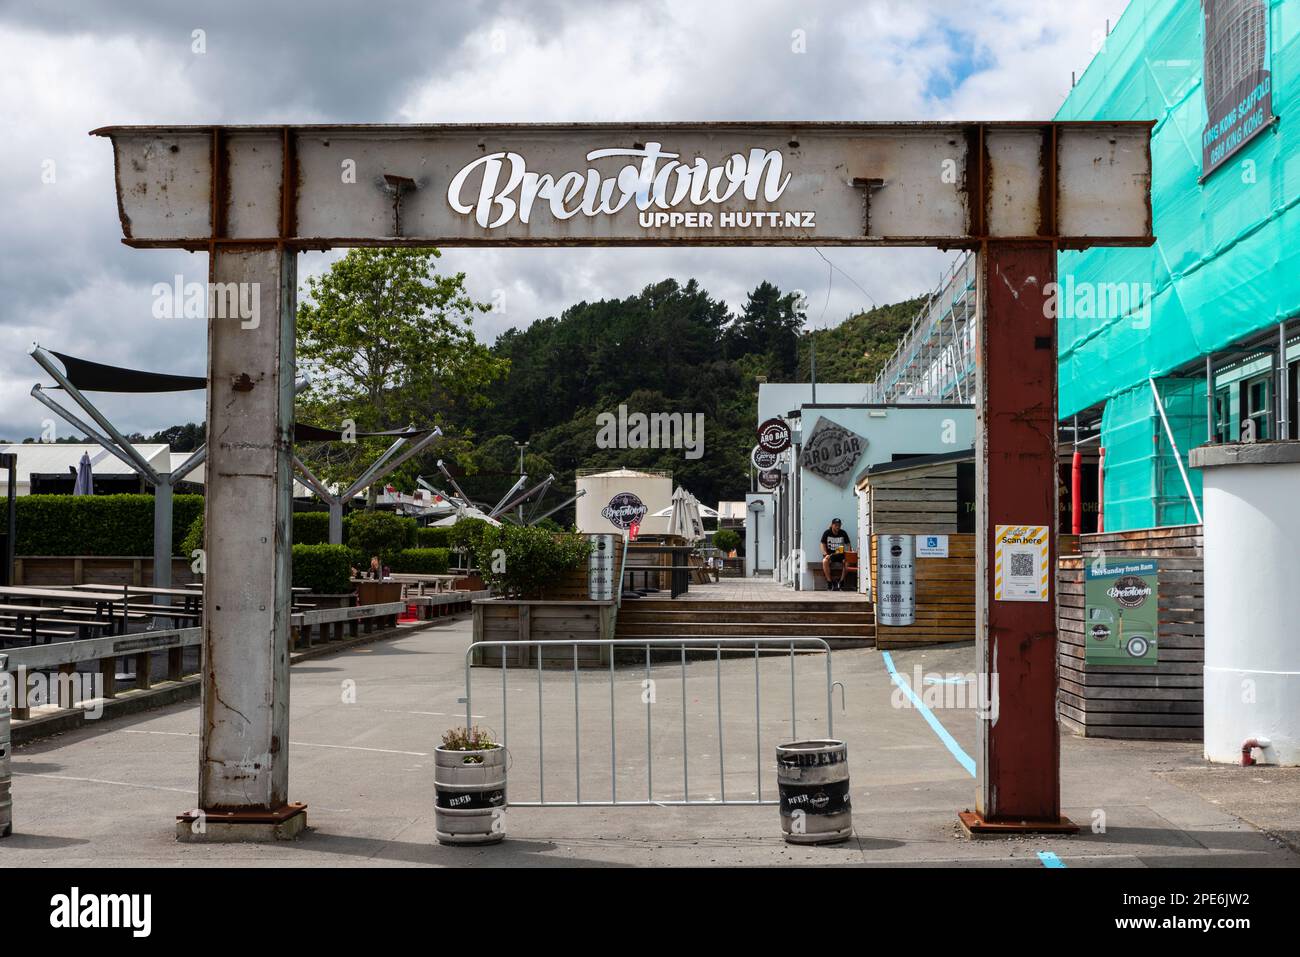 Brewtown in Upper Hutt, New Zealand, a visitor attraction with numerous craft beer breweries and a distillery in old Dunlop tyre factory Stock Photo